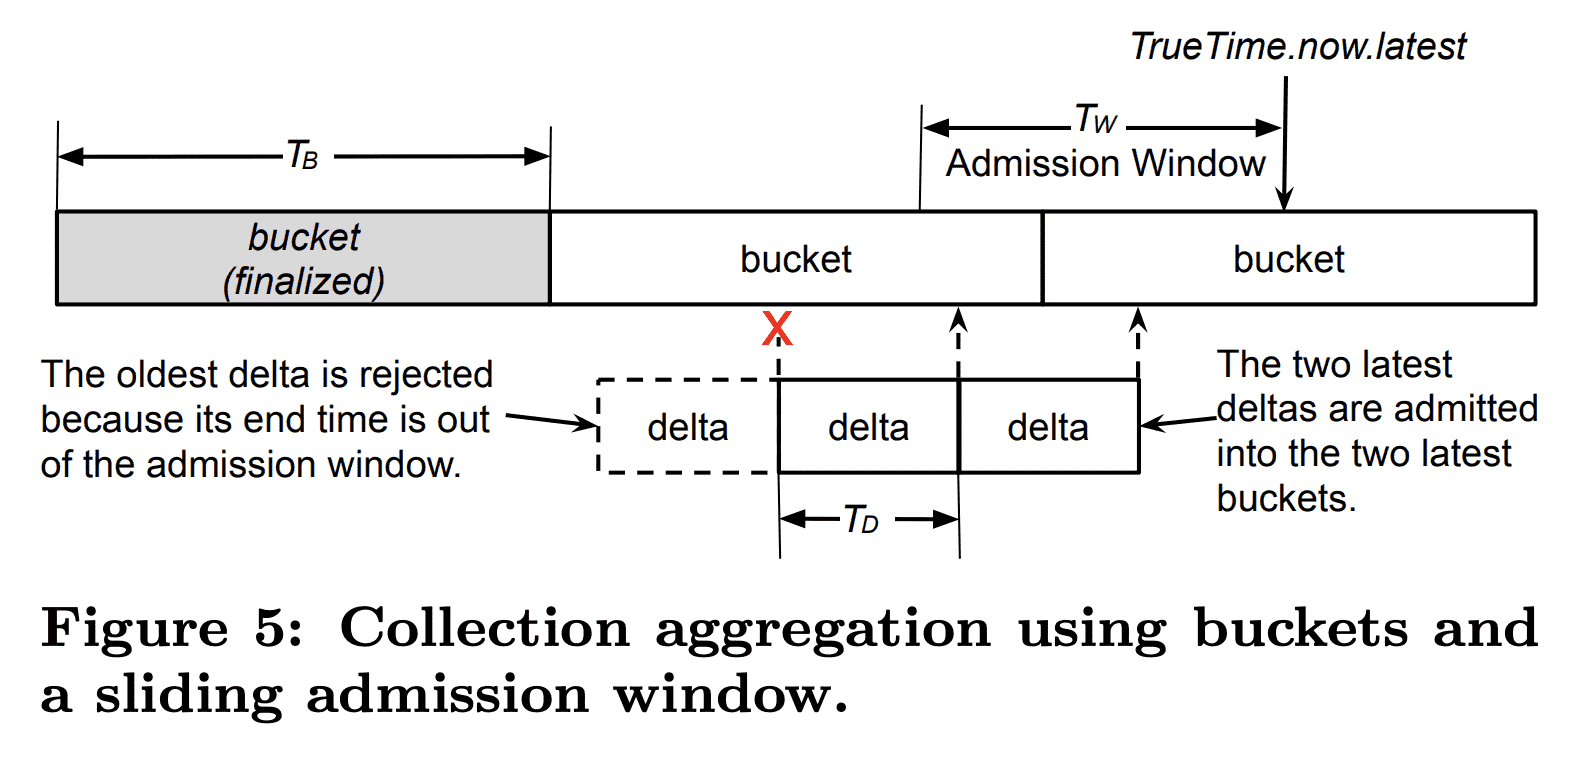 Collection aggregation using buckets and a sliding admission window